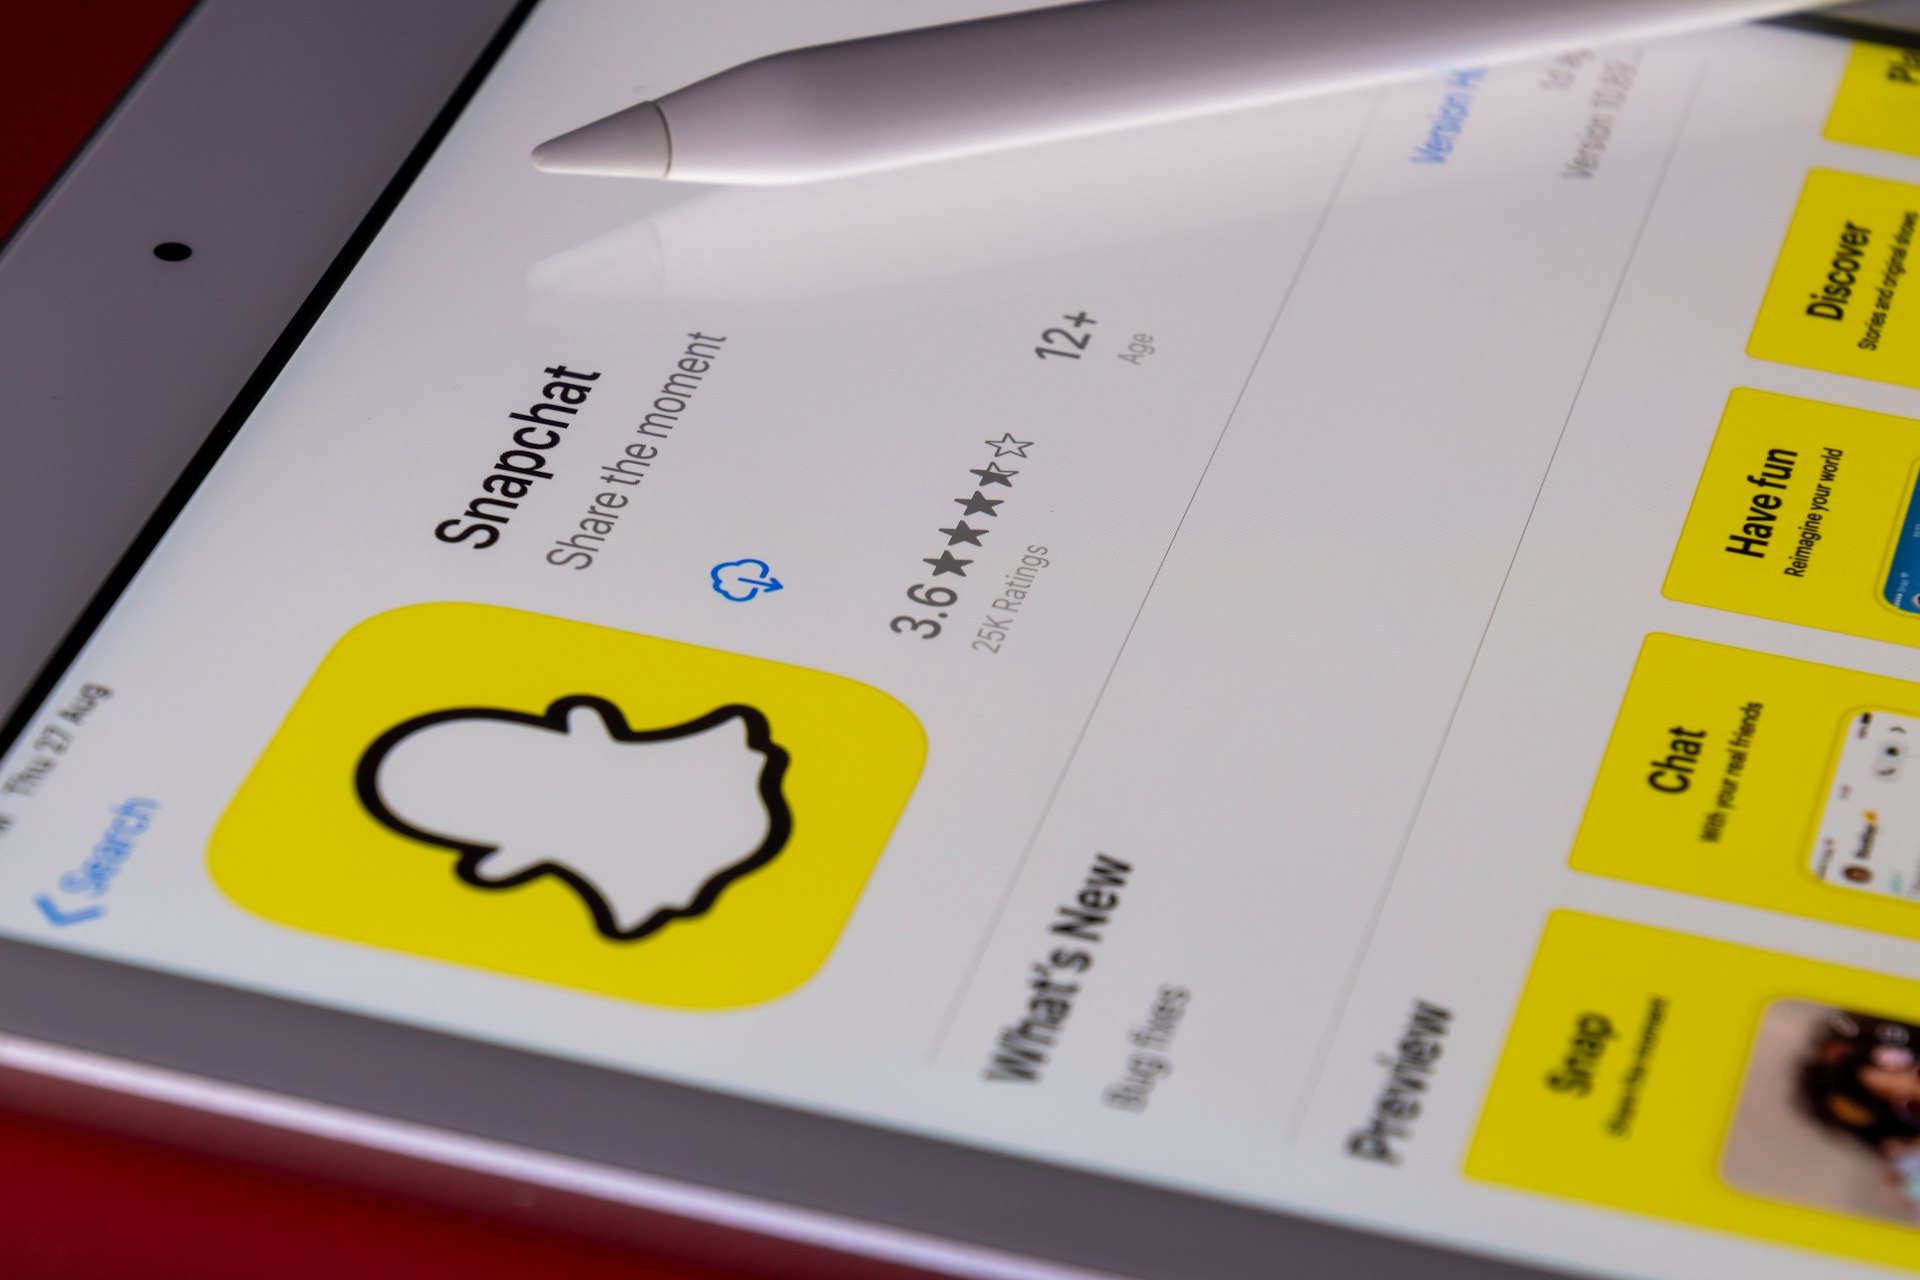 Snapchat Plus, a paid subscription service, is being developed by Snap